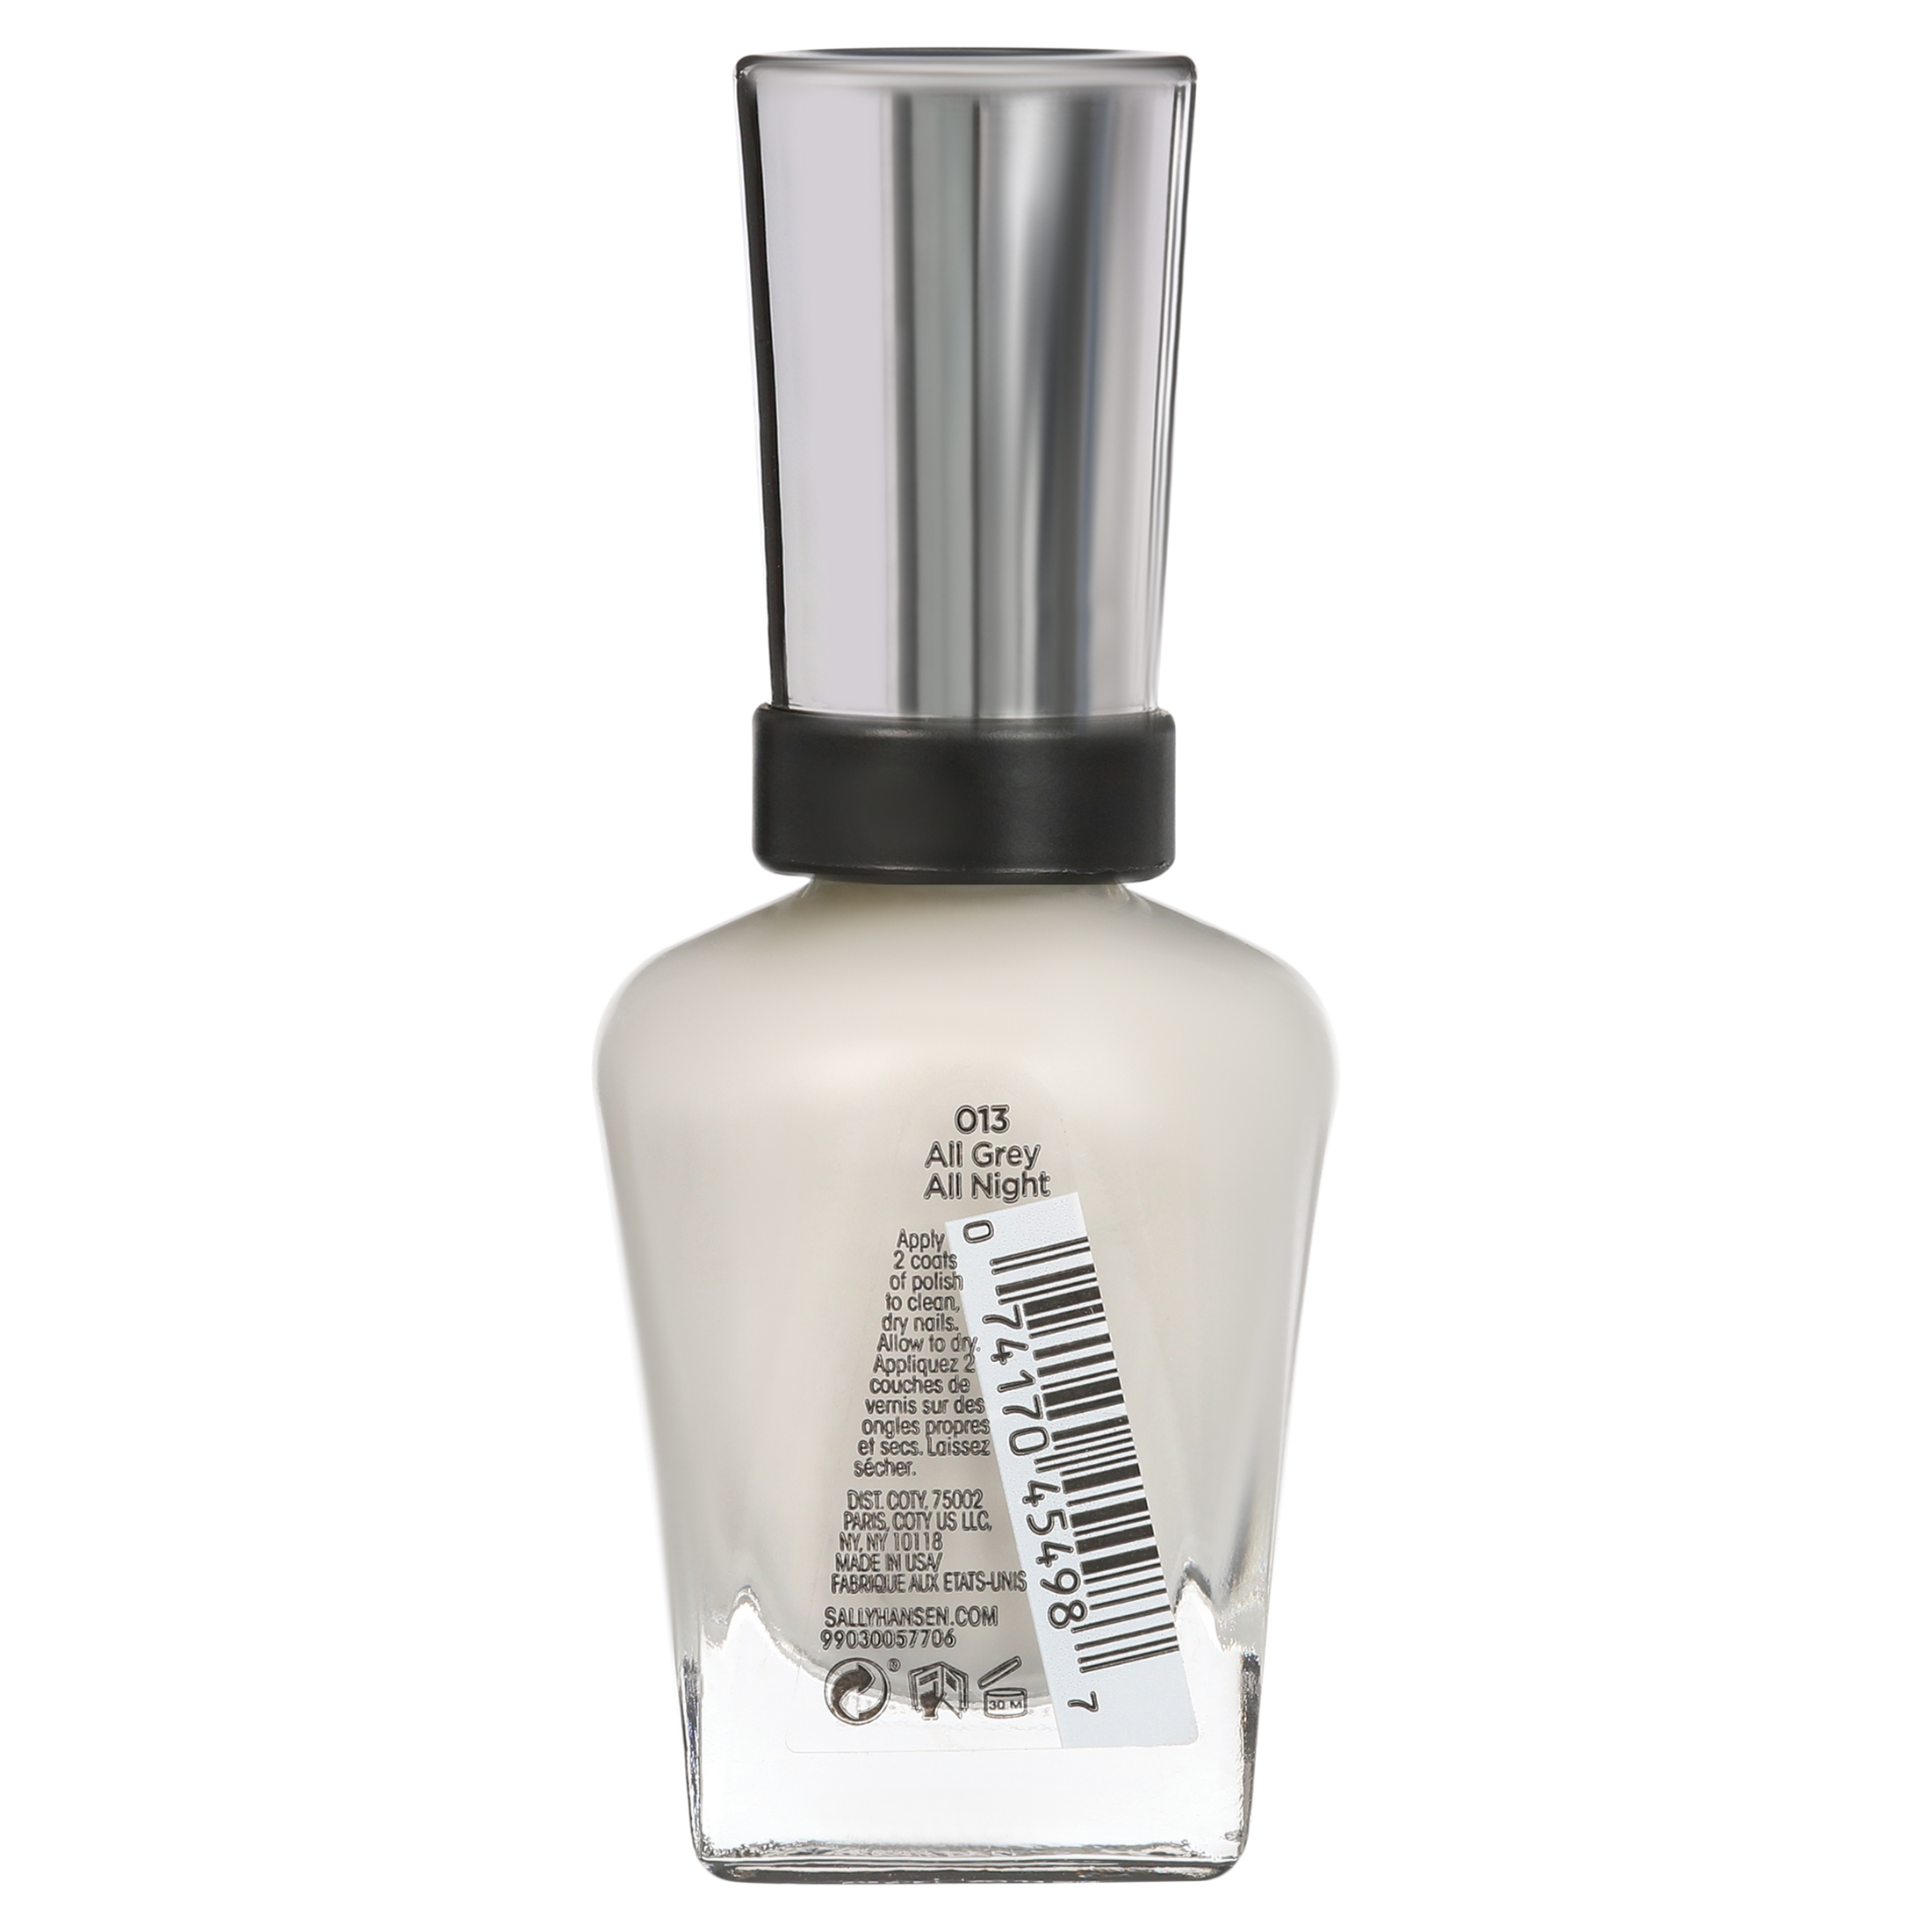 Sally Hansen Complete Salon Manicure Nail Color, All Grey All Night - image 6 of 7